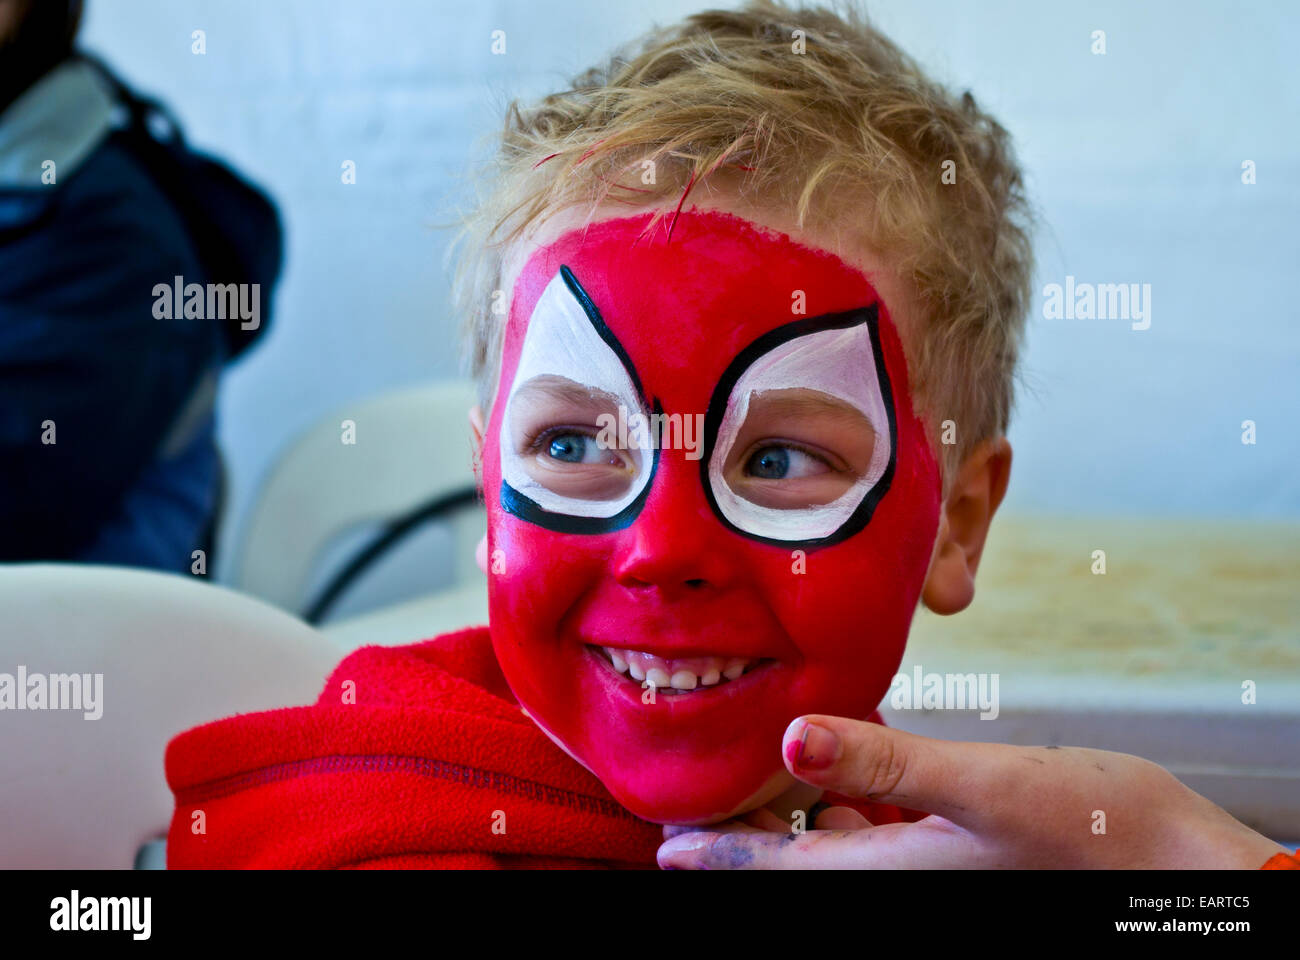 A blonde boy happily has his face painted bright red like spiderman. Stock Photo